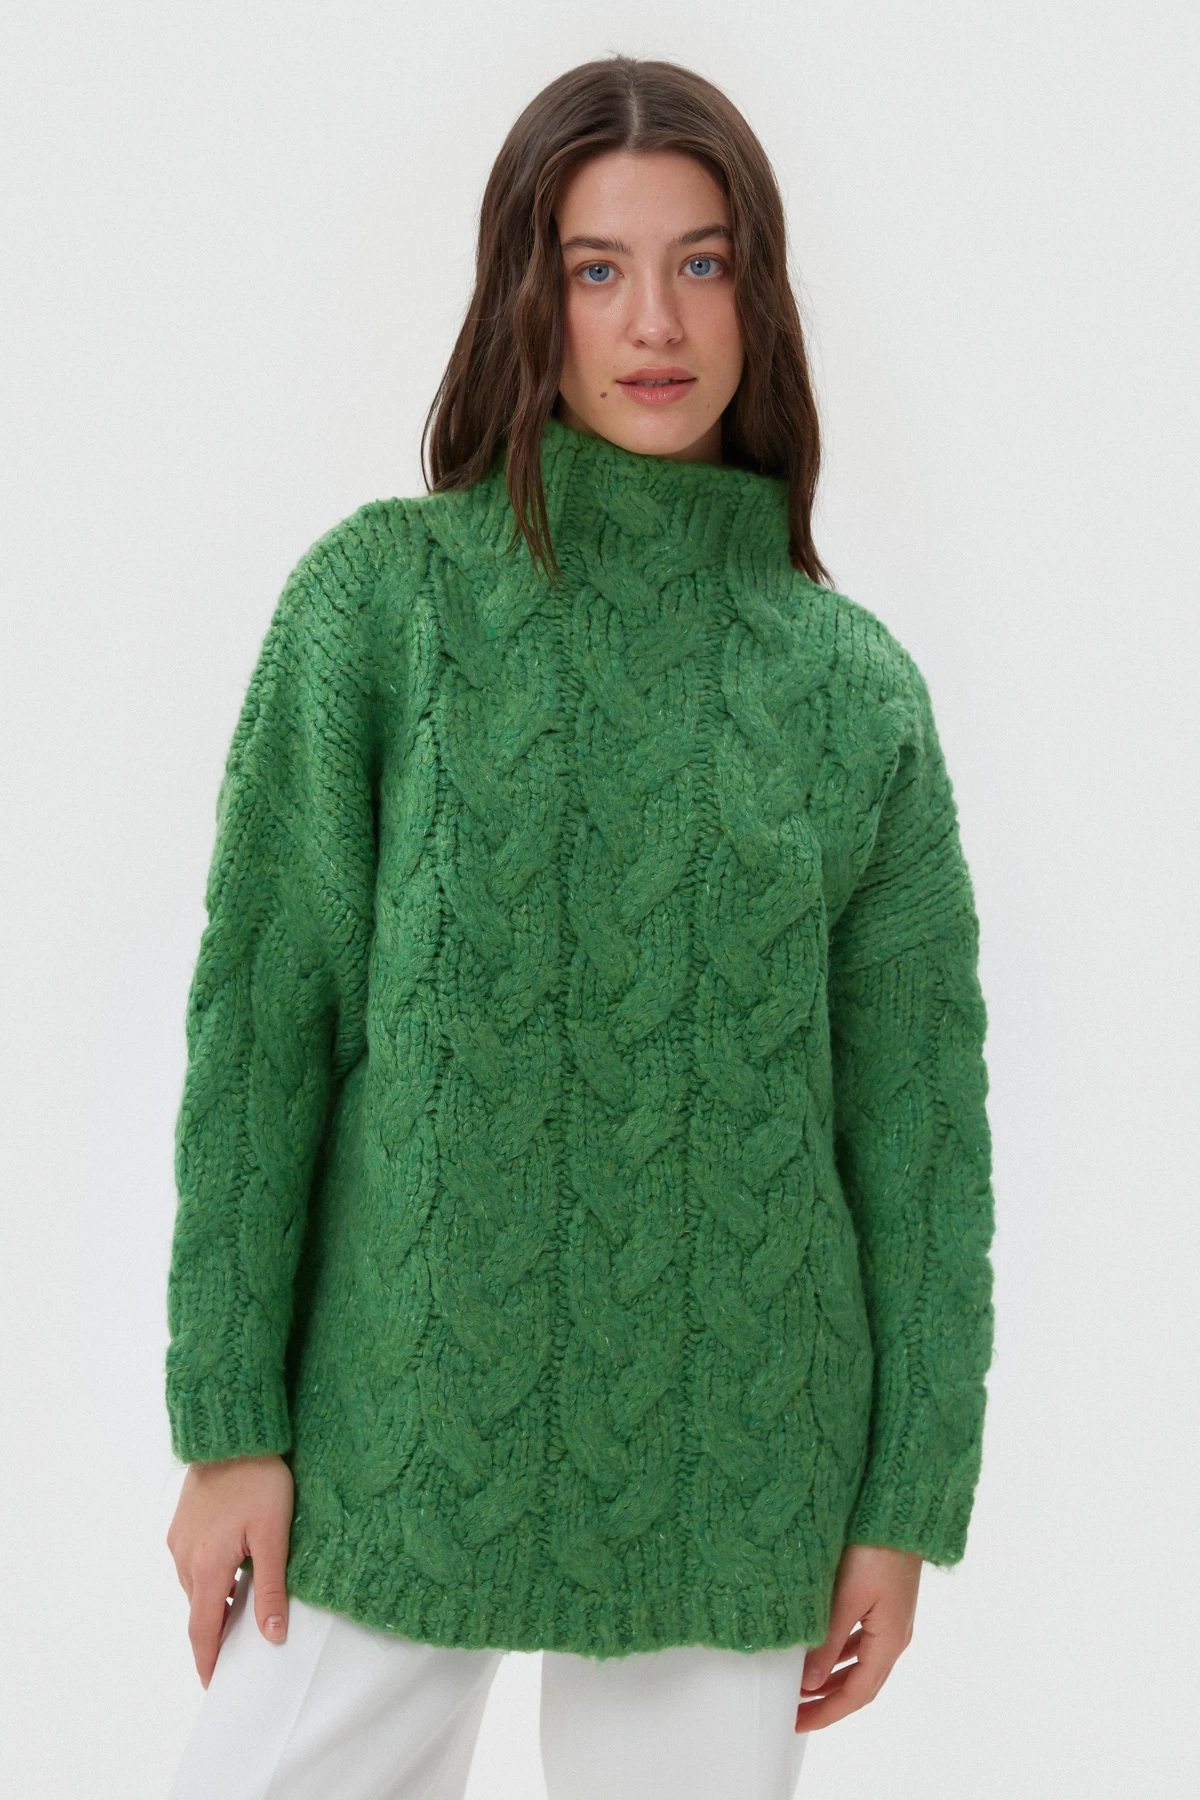 Green elongated sweater in "braids" with cotton, photo 1